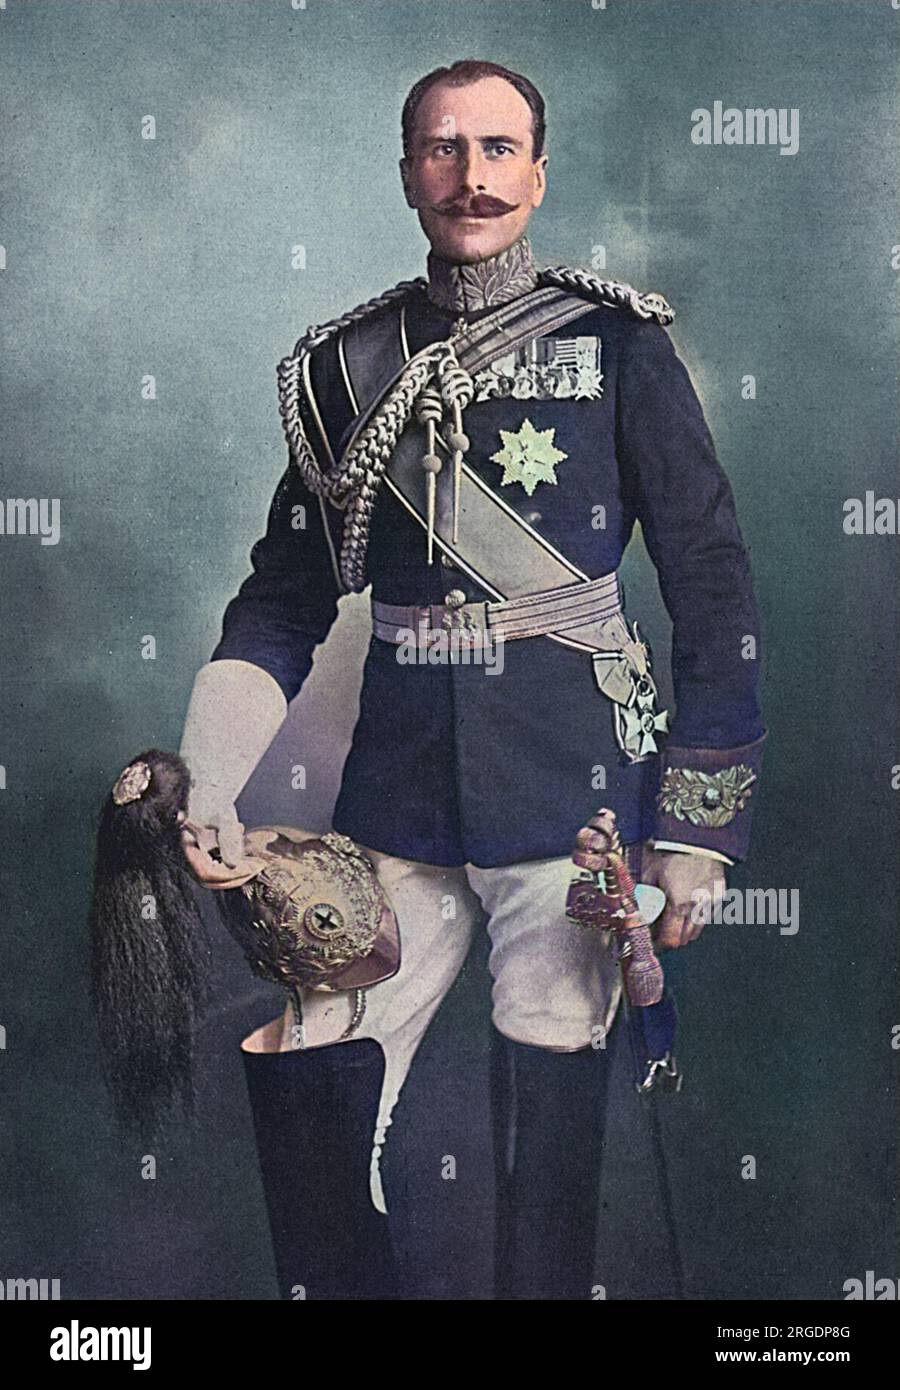 Prince Alexander of Teck (1874-1957), later Earl of Athlone, brother of Queen Mary, who had recently been promoted to the rank of Brigadier-General on General Staff.  The Bystander comments that he has earned his promotion, unlike members of the German royal family who, it suggests, 'would probably by now be in command of an Army Corps at the very least.' Stock Photo